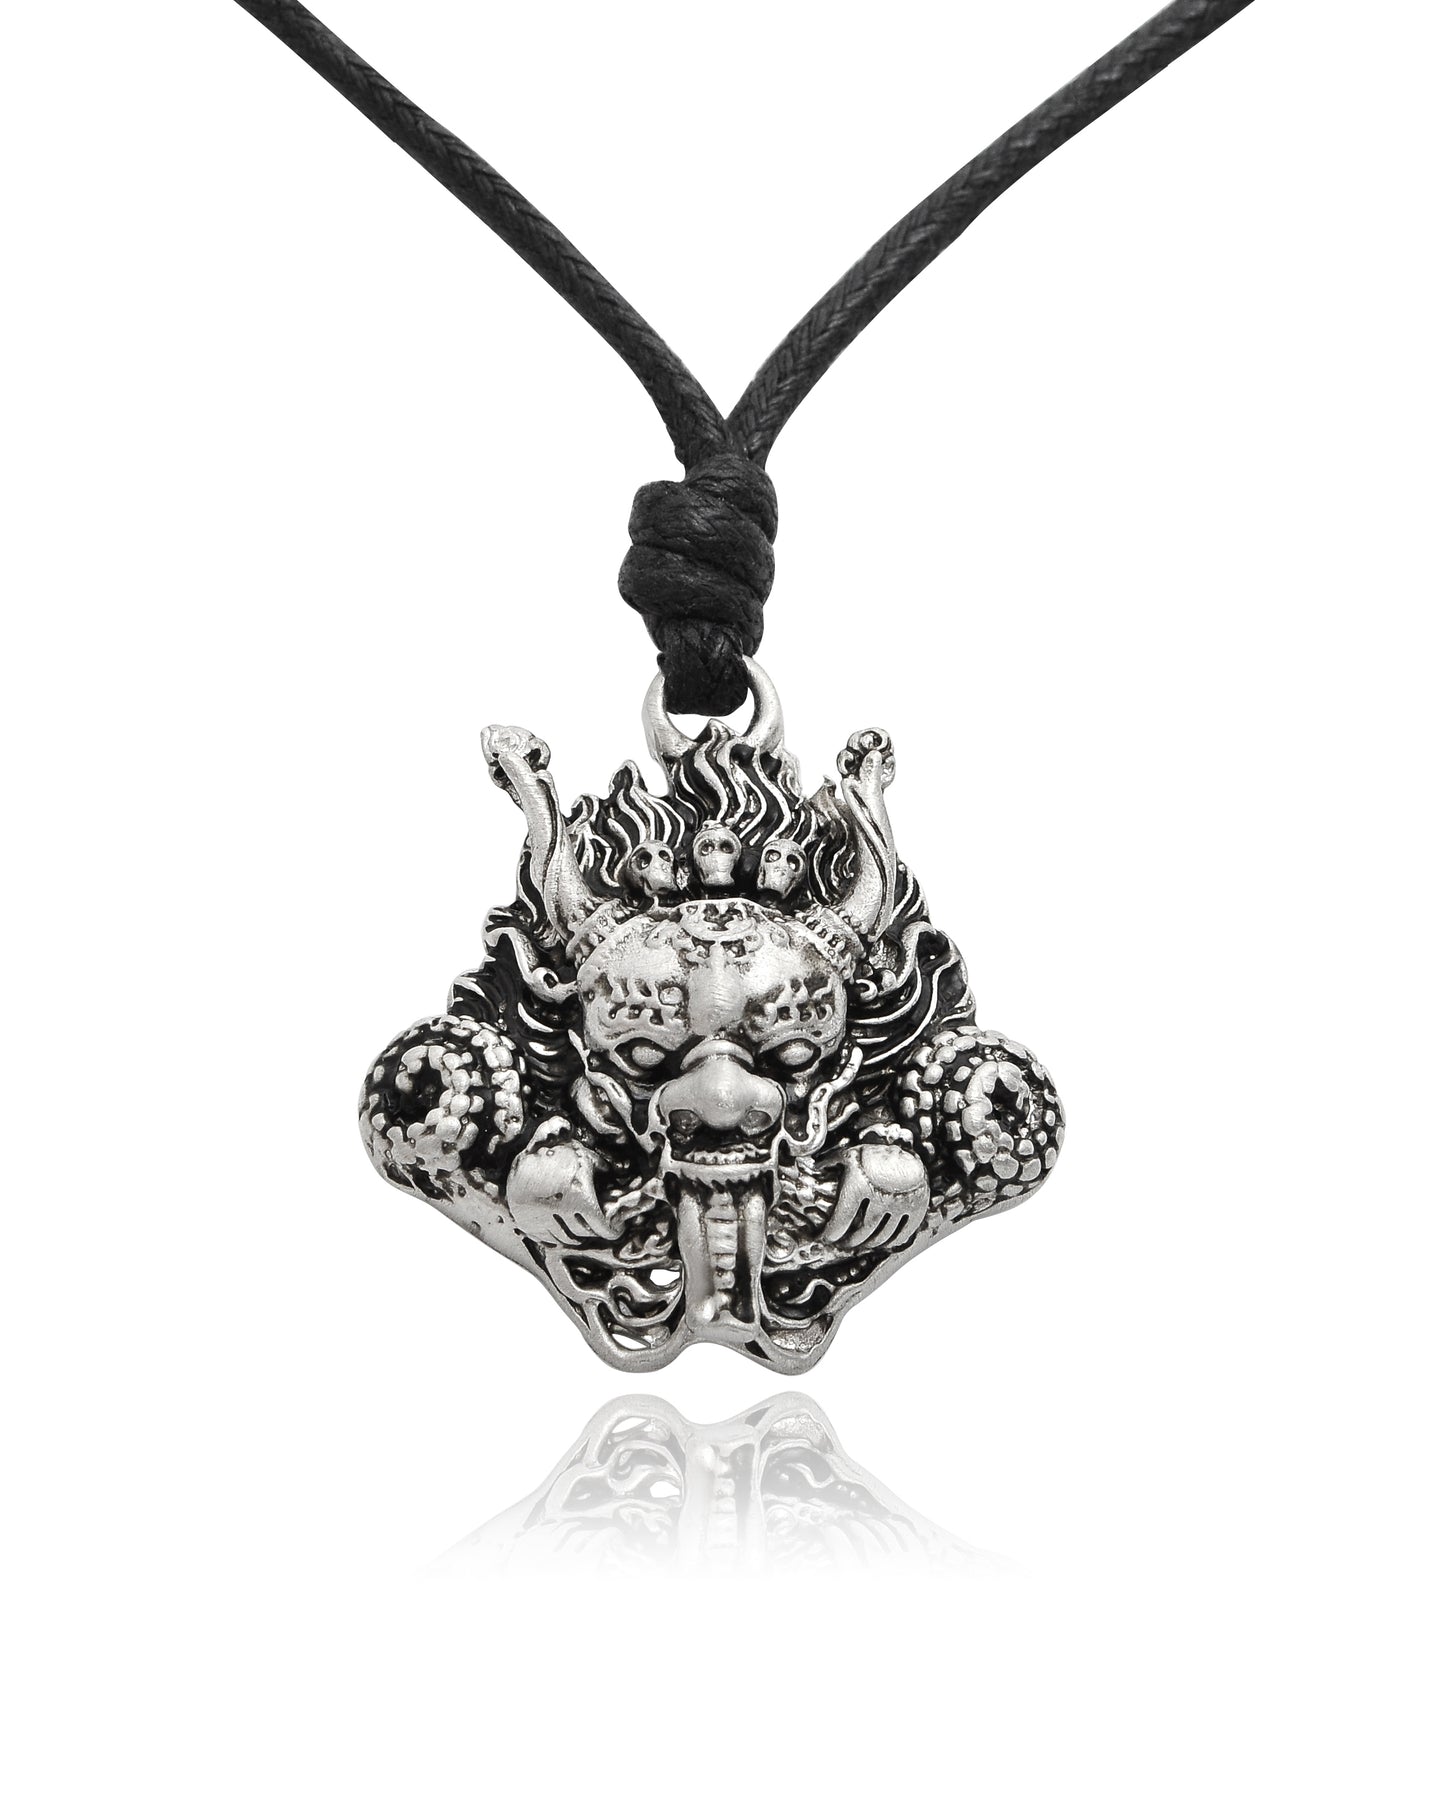 Japanese Hannya Mask 92.5 Sterling Silver Pewter Brass Necklace Pendant Jewelry